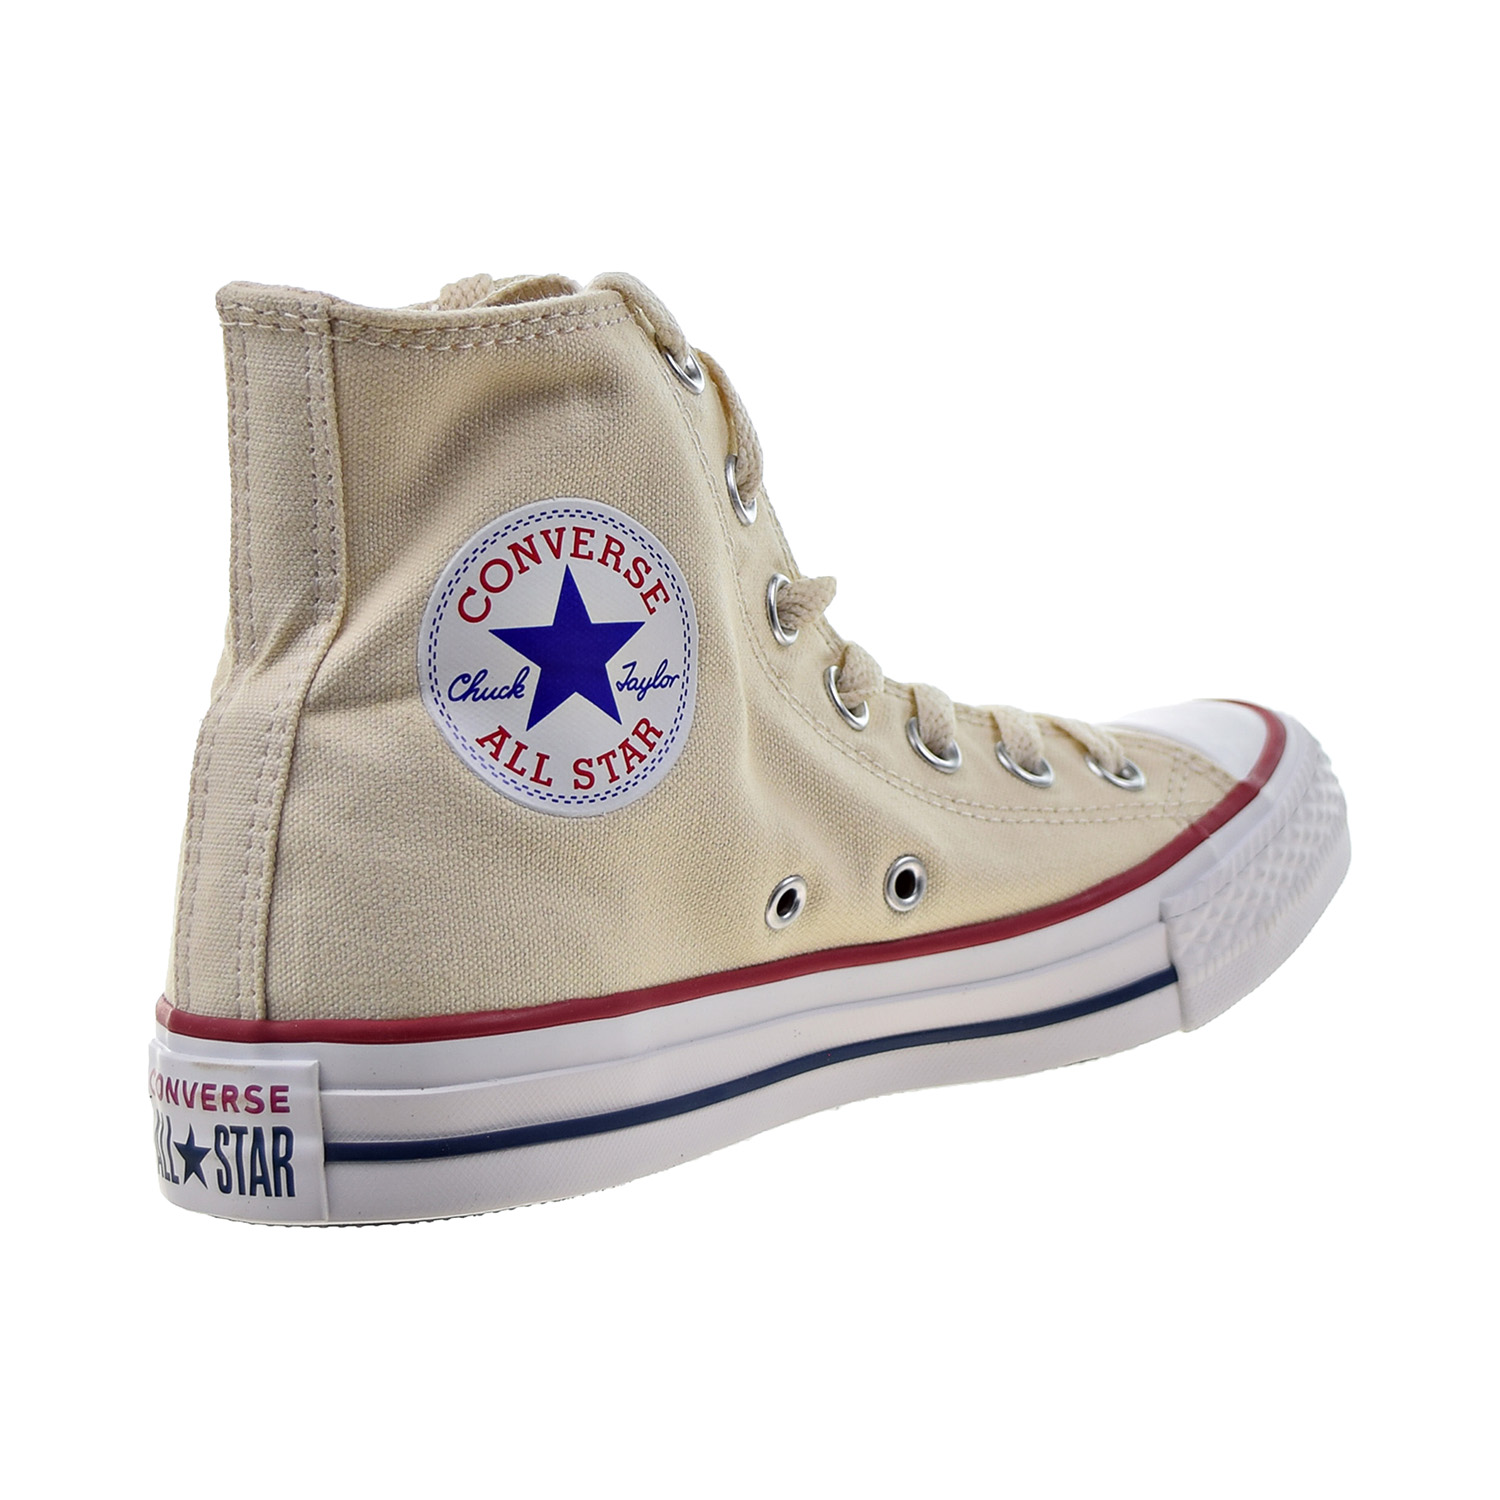 Converse Chuck Taylor All Star High Top Sneaker - image 3 of 6